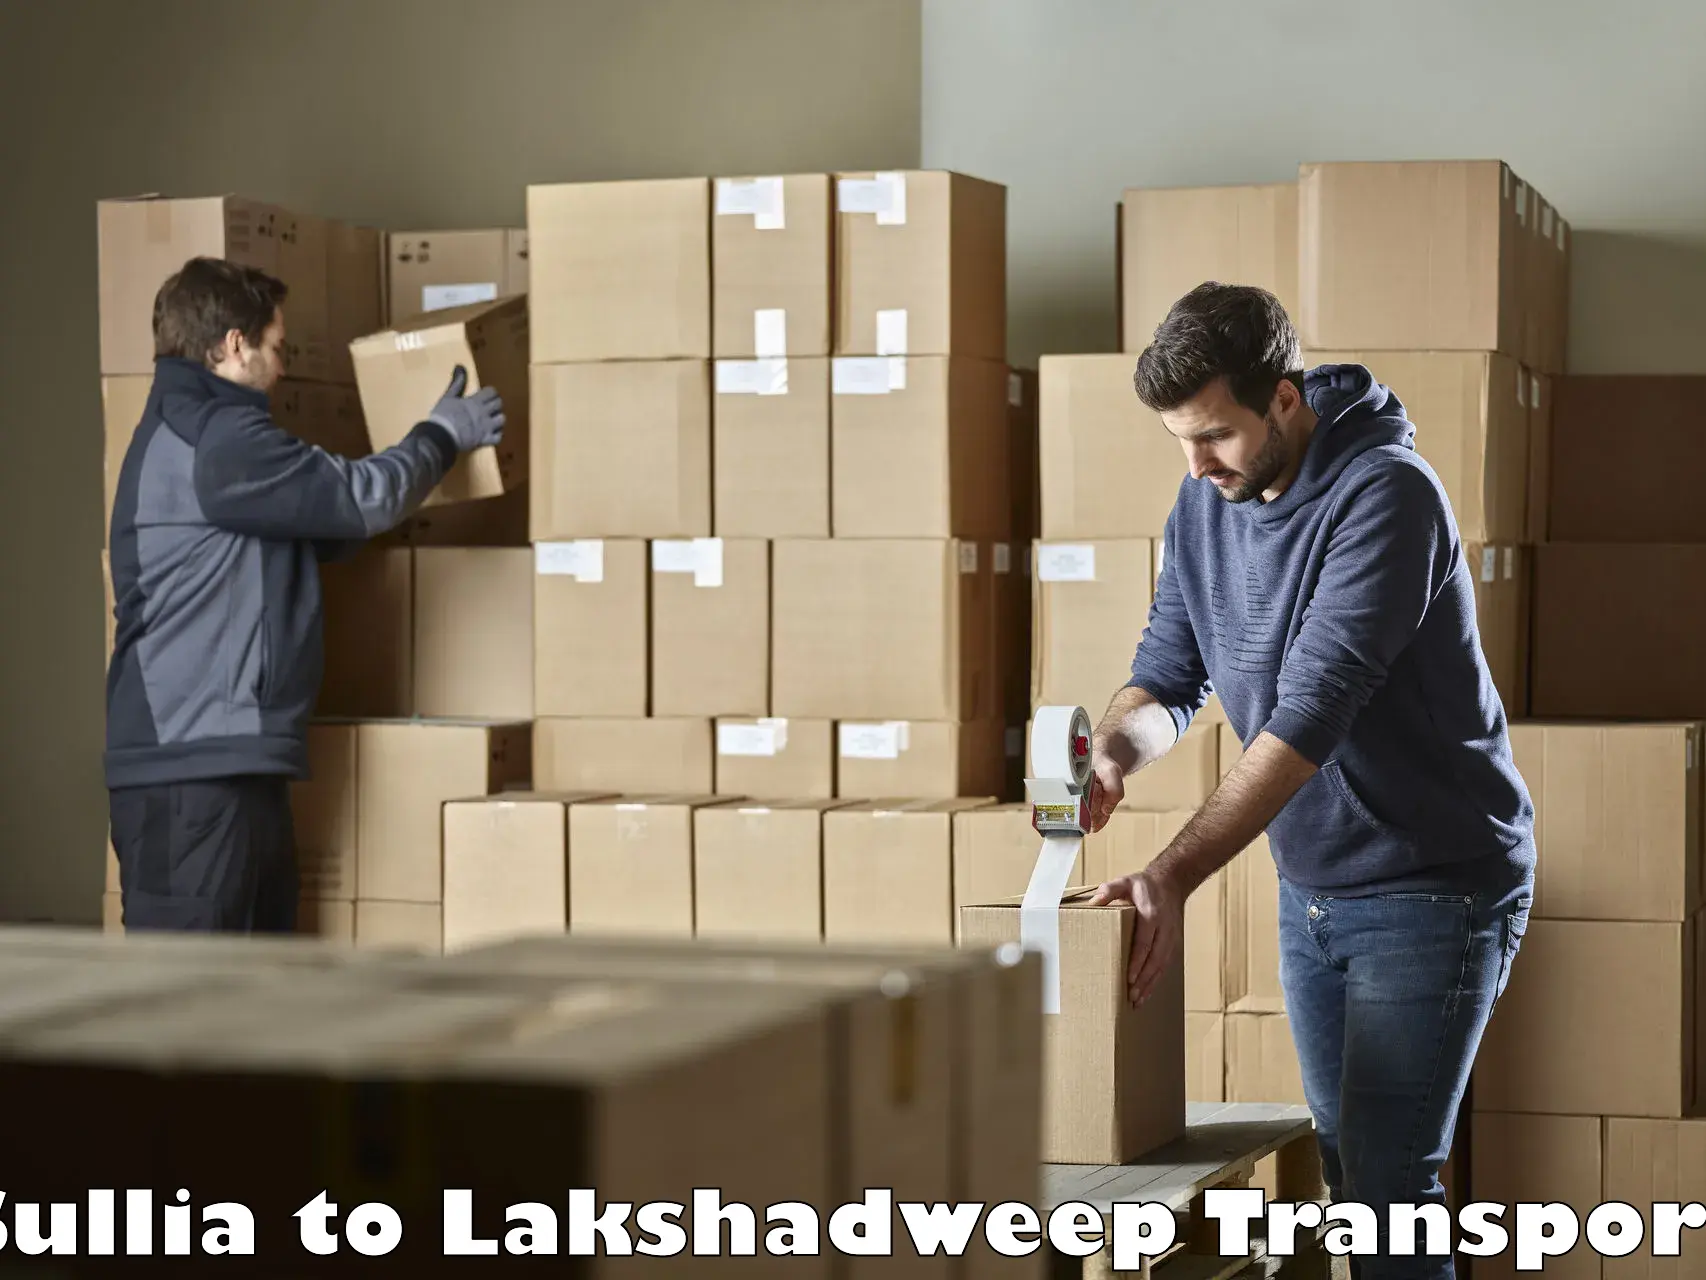 Transport shared services Sullia to Lakshadweep